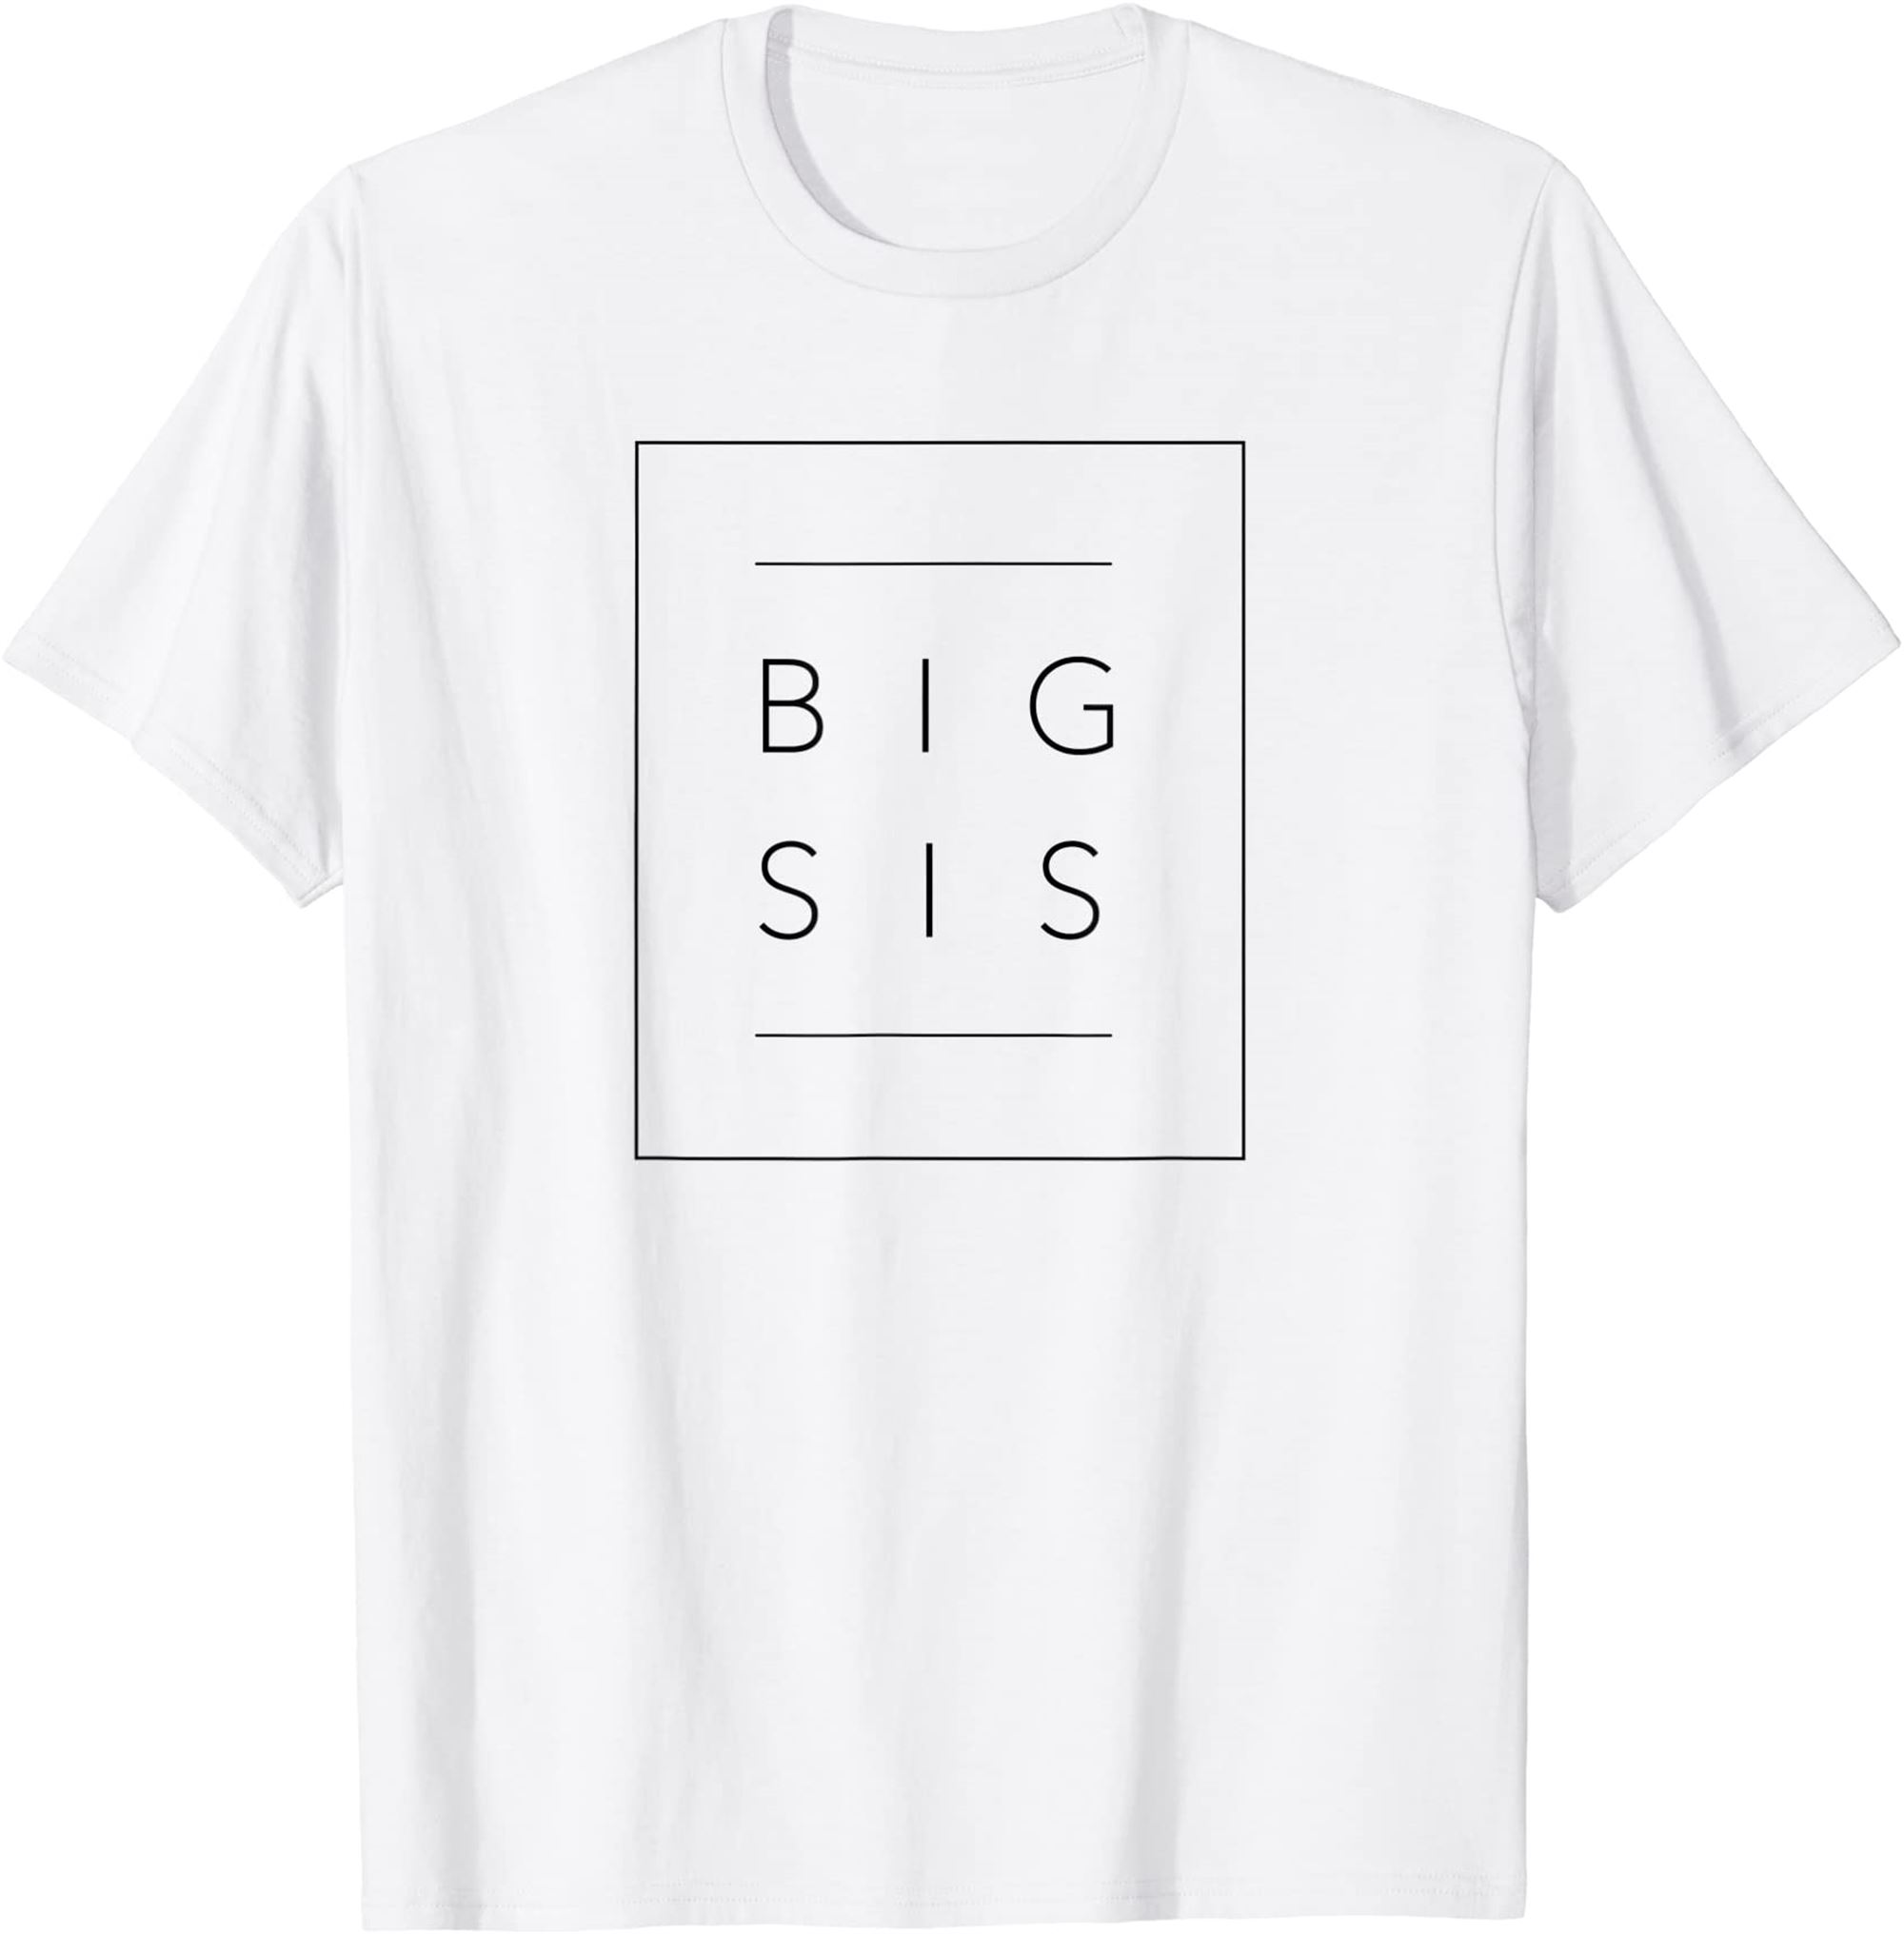 Older Sister Gift Proud New Big Sis T-shirt Full Size Up To 5xl